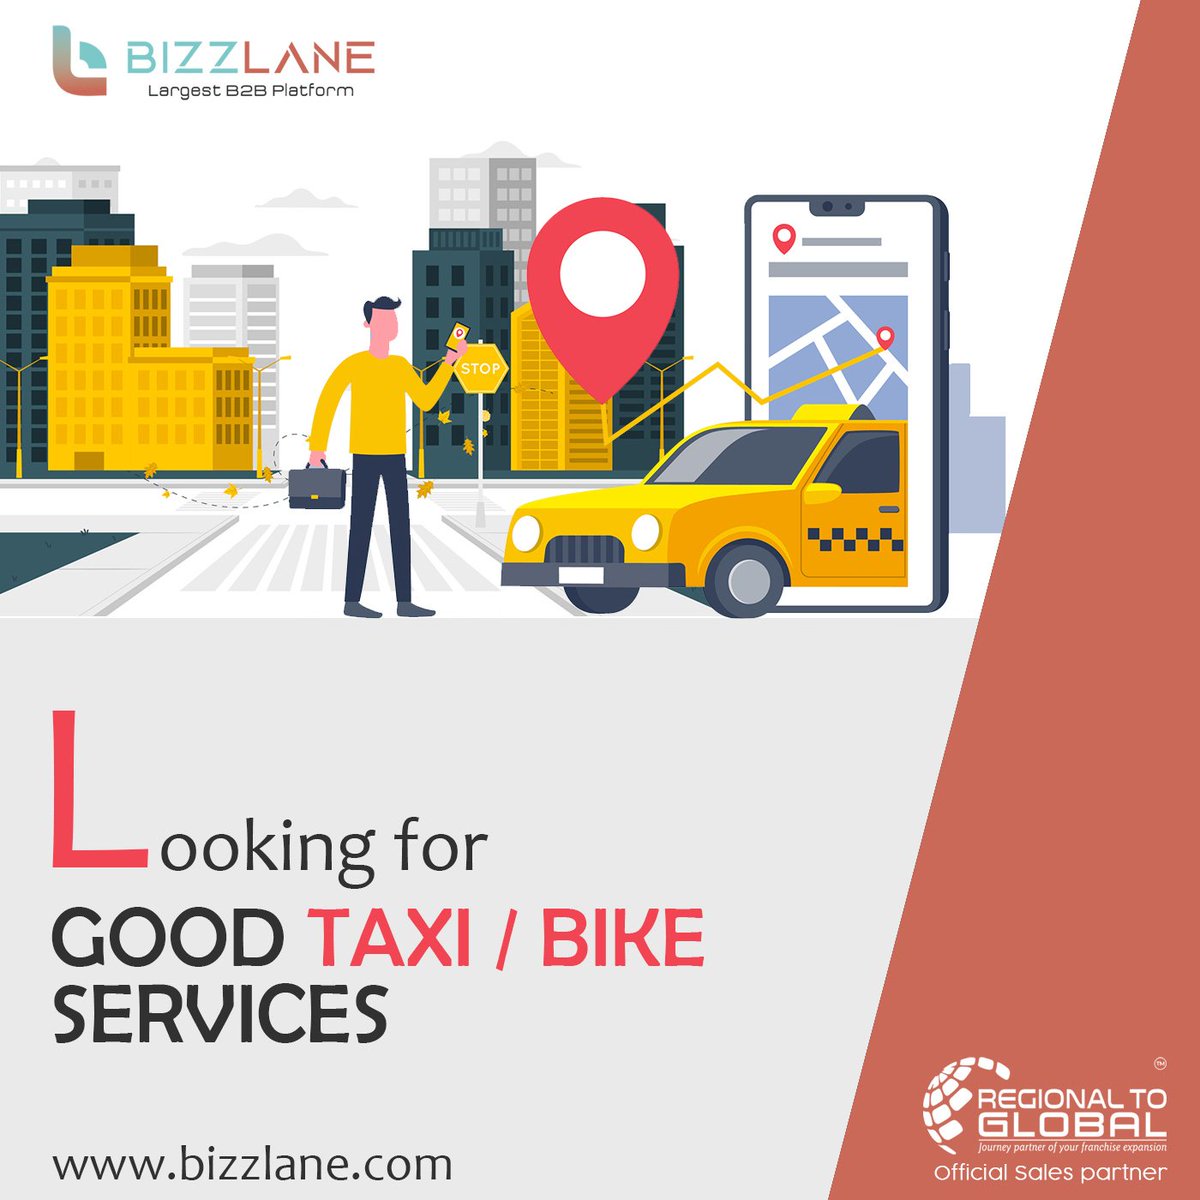 Find Near you - Store , Doctor, Gym , Food on Bizzlane.